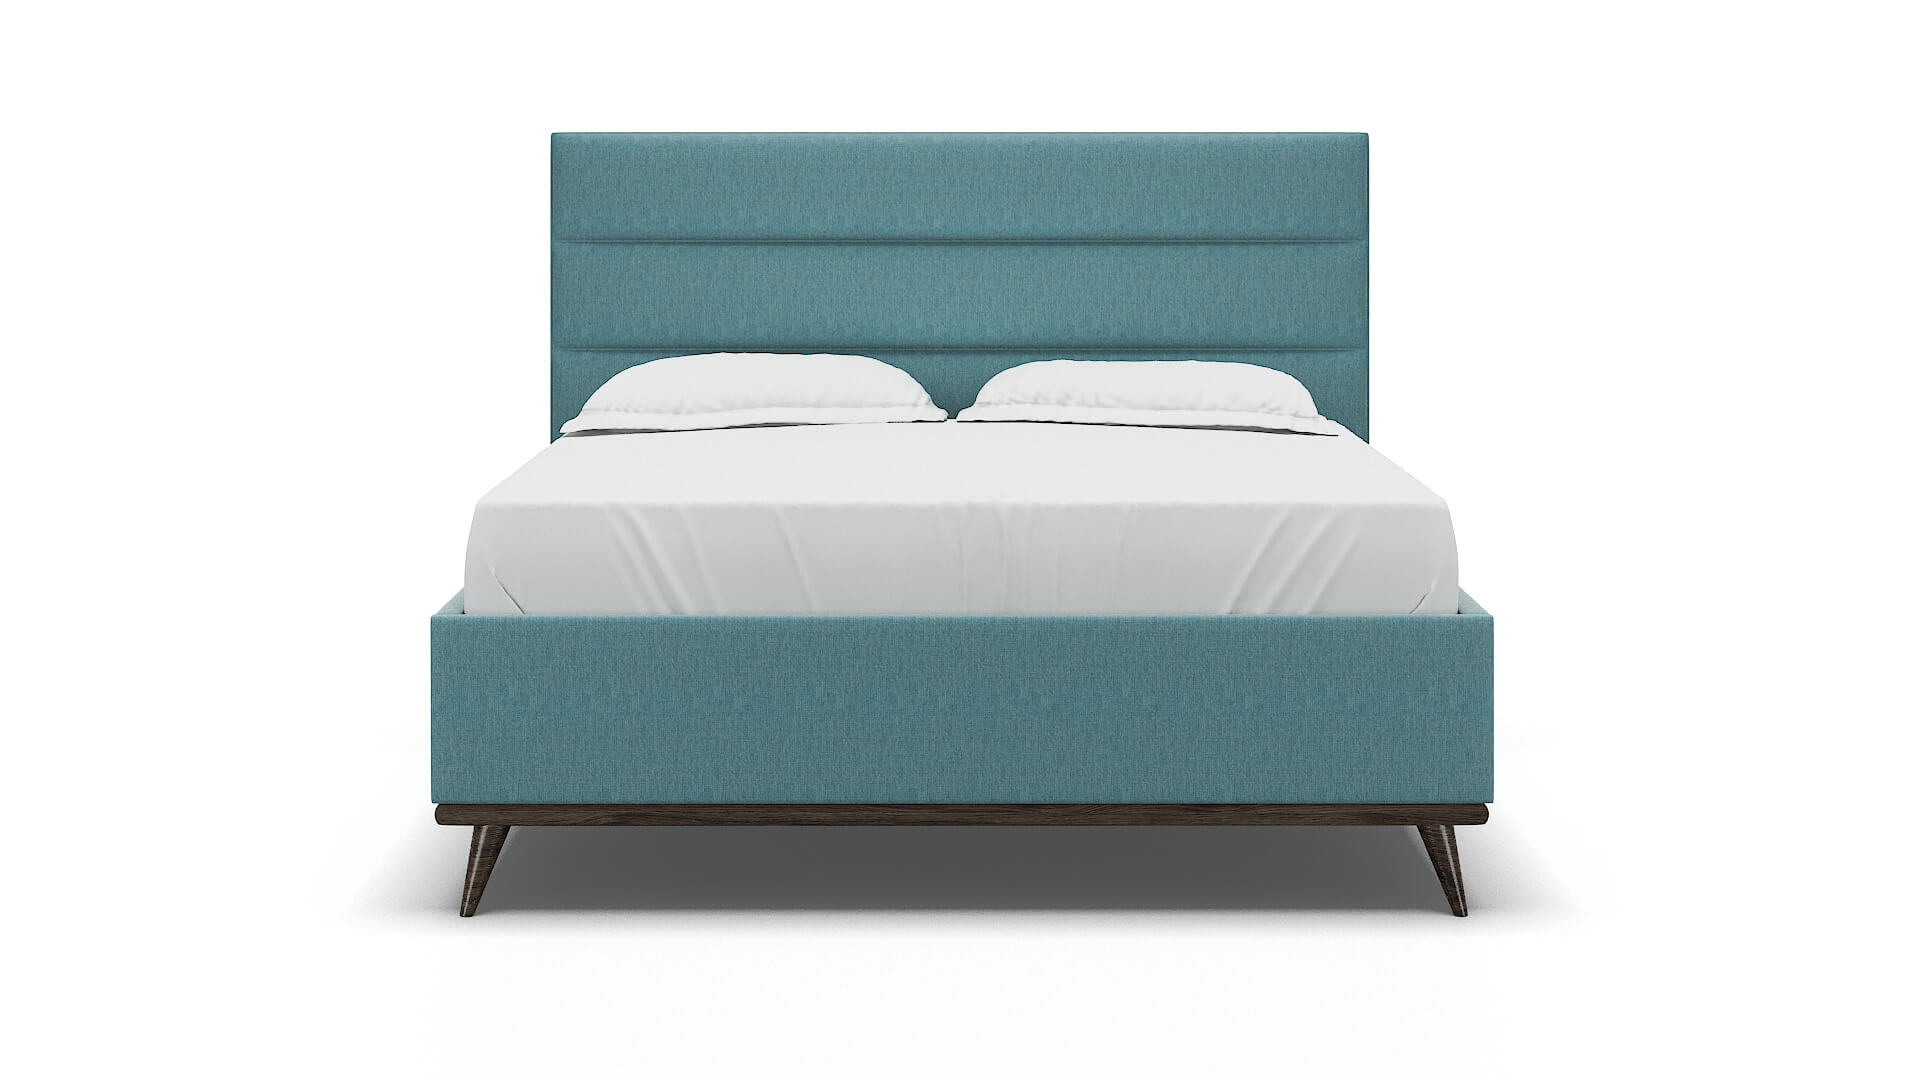 Hannela Cosmo Turquoise Bed King espresso legs 1